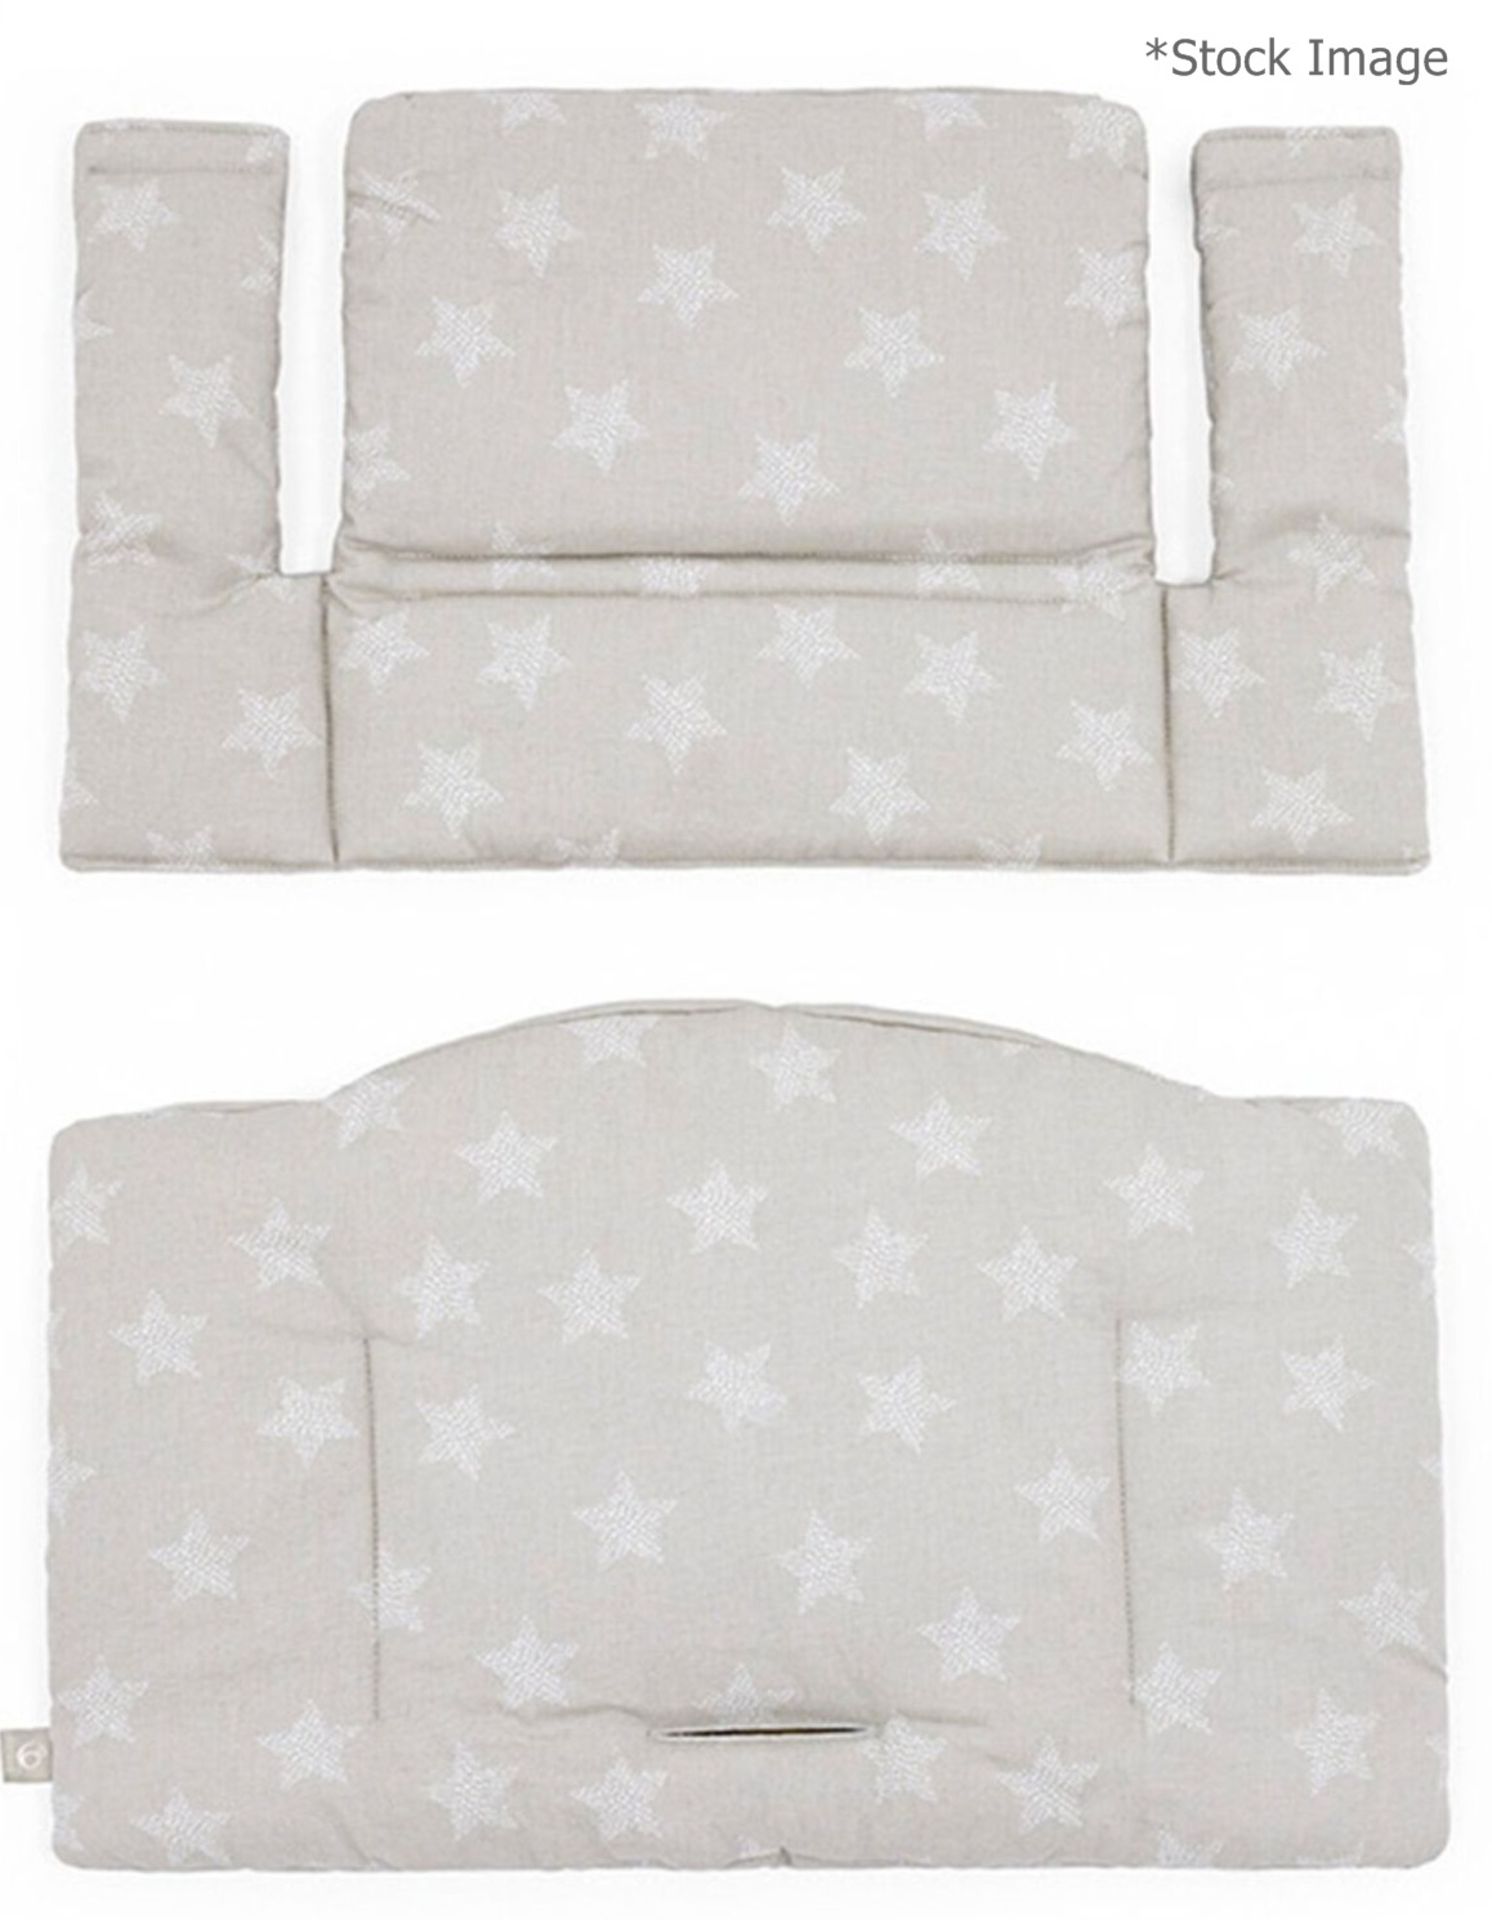 1 x STOKKE Tripp Trap Classic Cushion Accessory - Colour: Grey Stars - Unused Boxed Stock - Ref: - Image 2 of 4